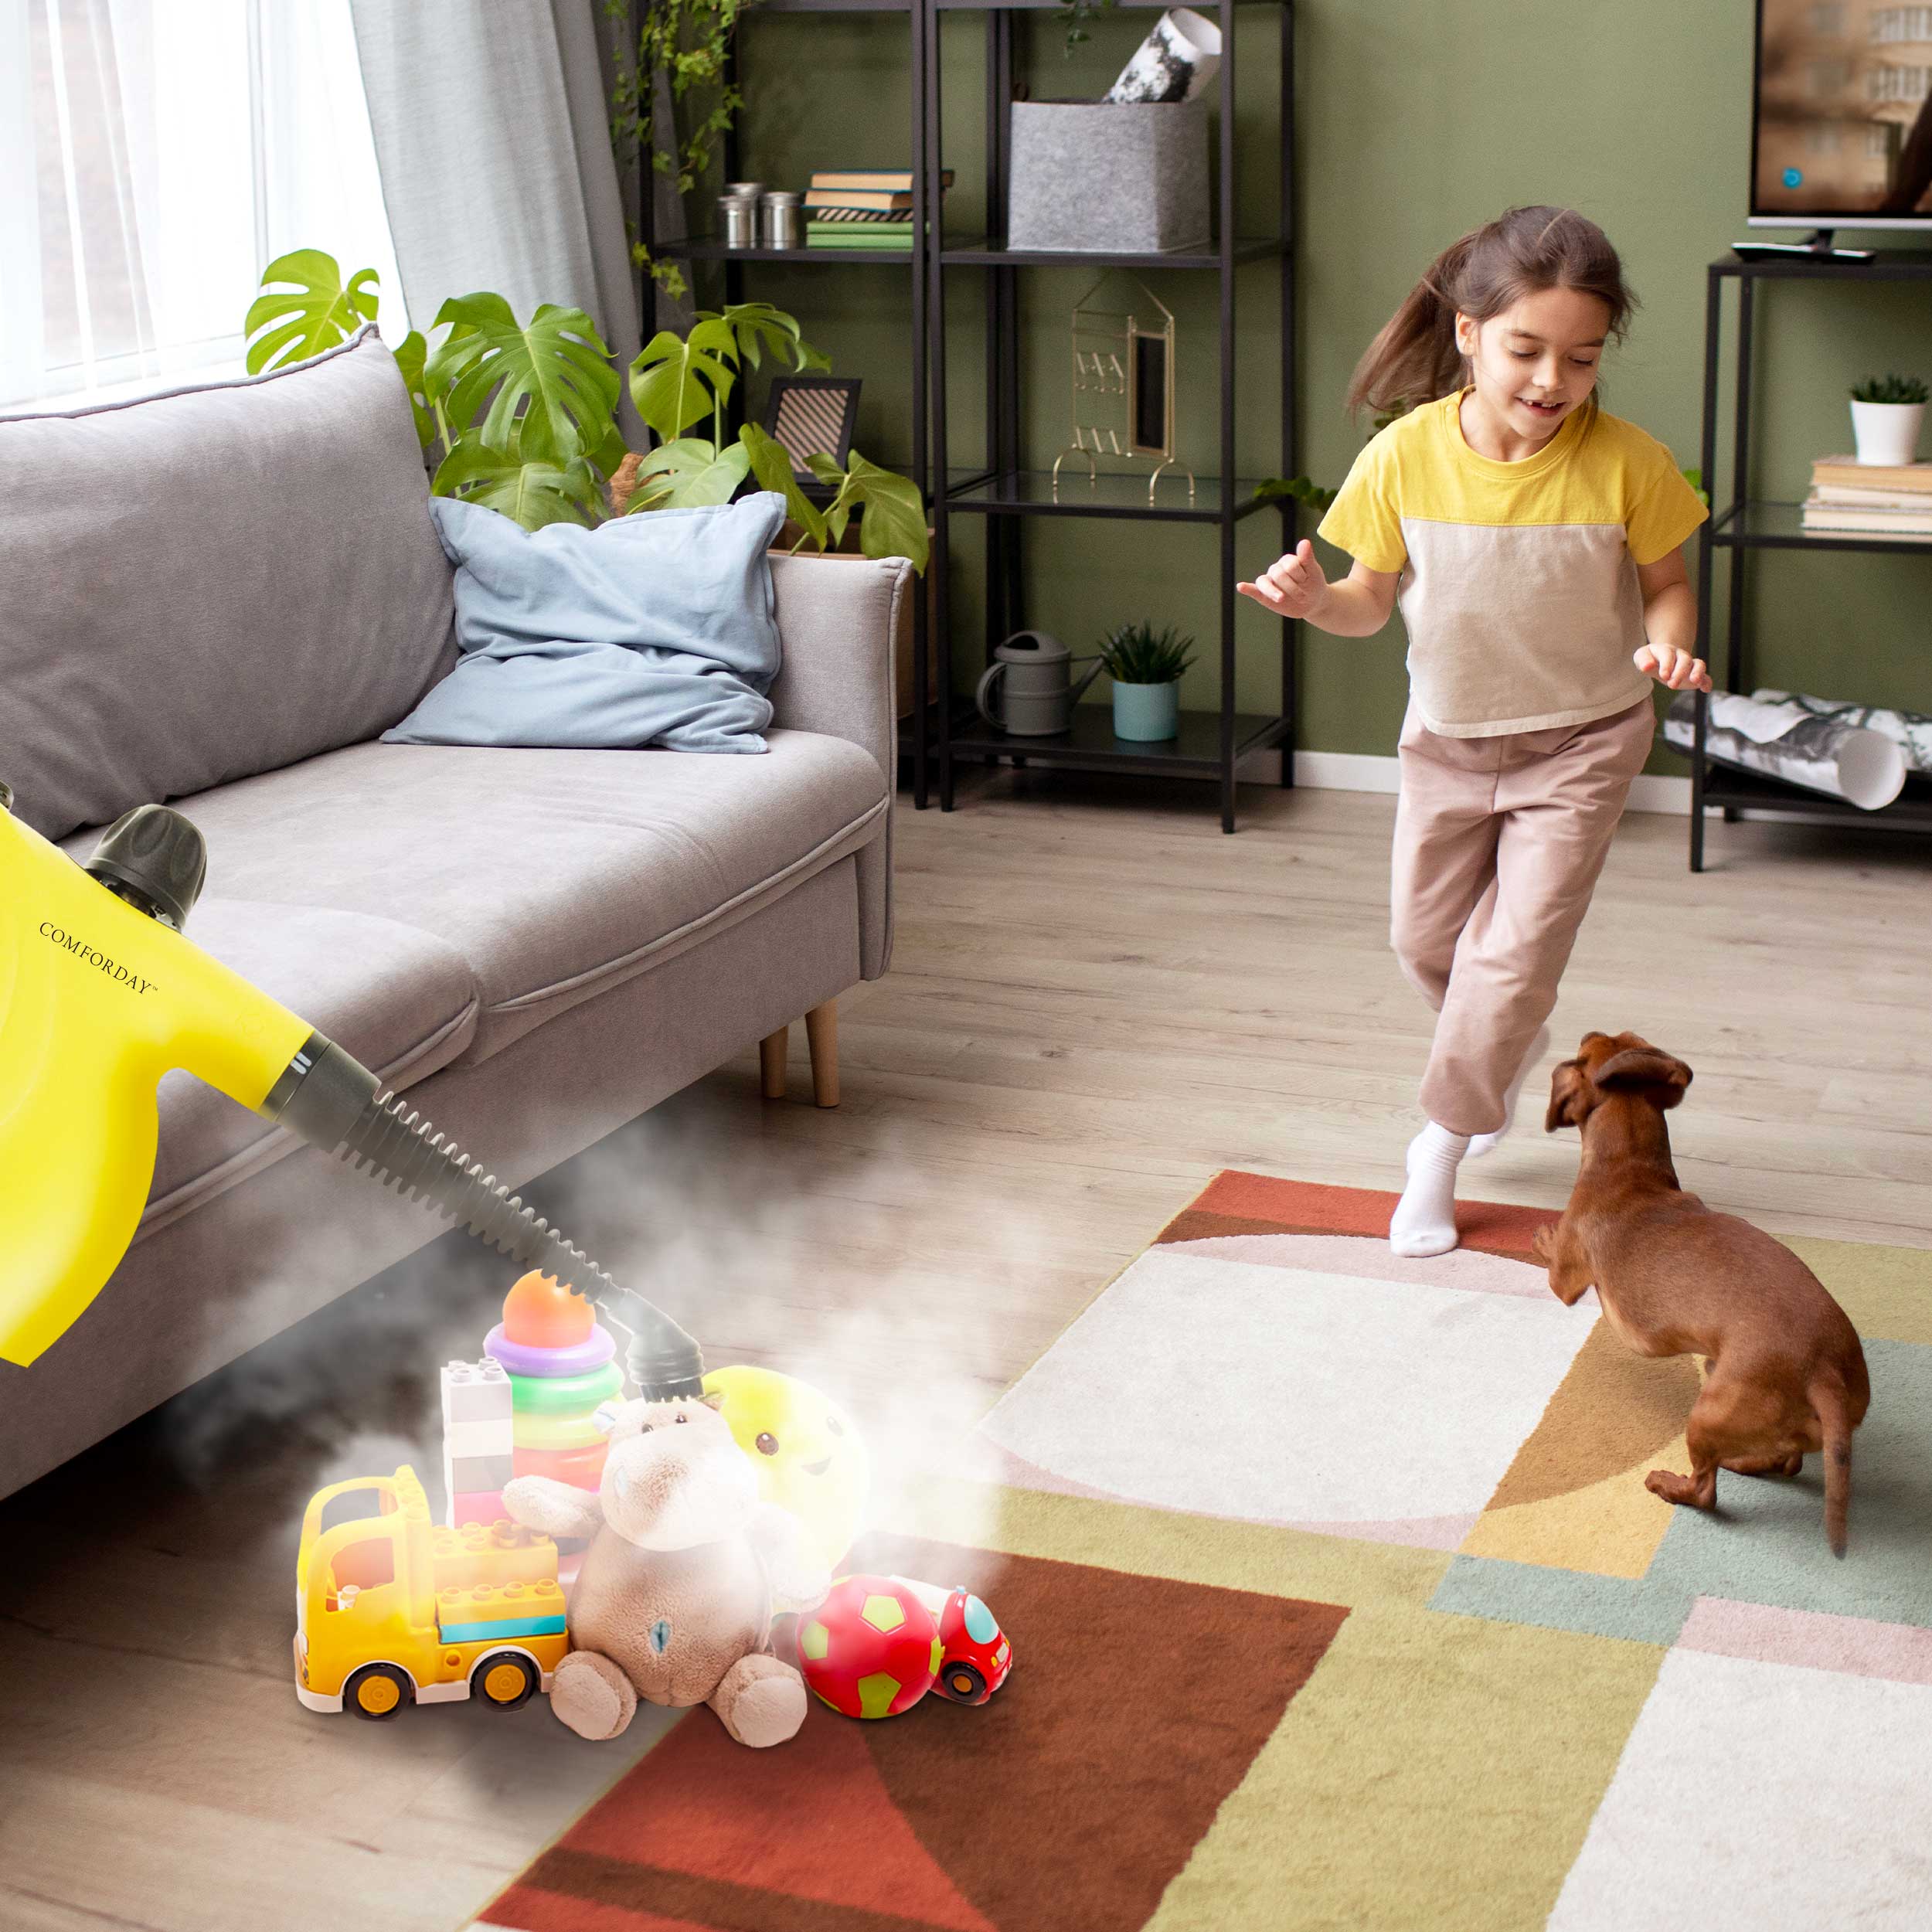 Discovering the Magic of Clean: A Closer Look at the Multi-Purpose Handheld Pressurized Steam Cleaner